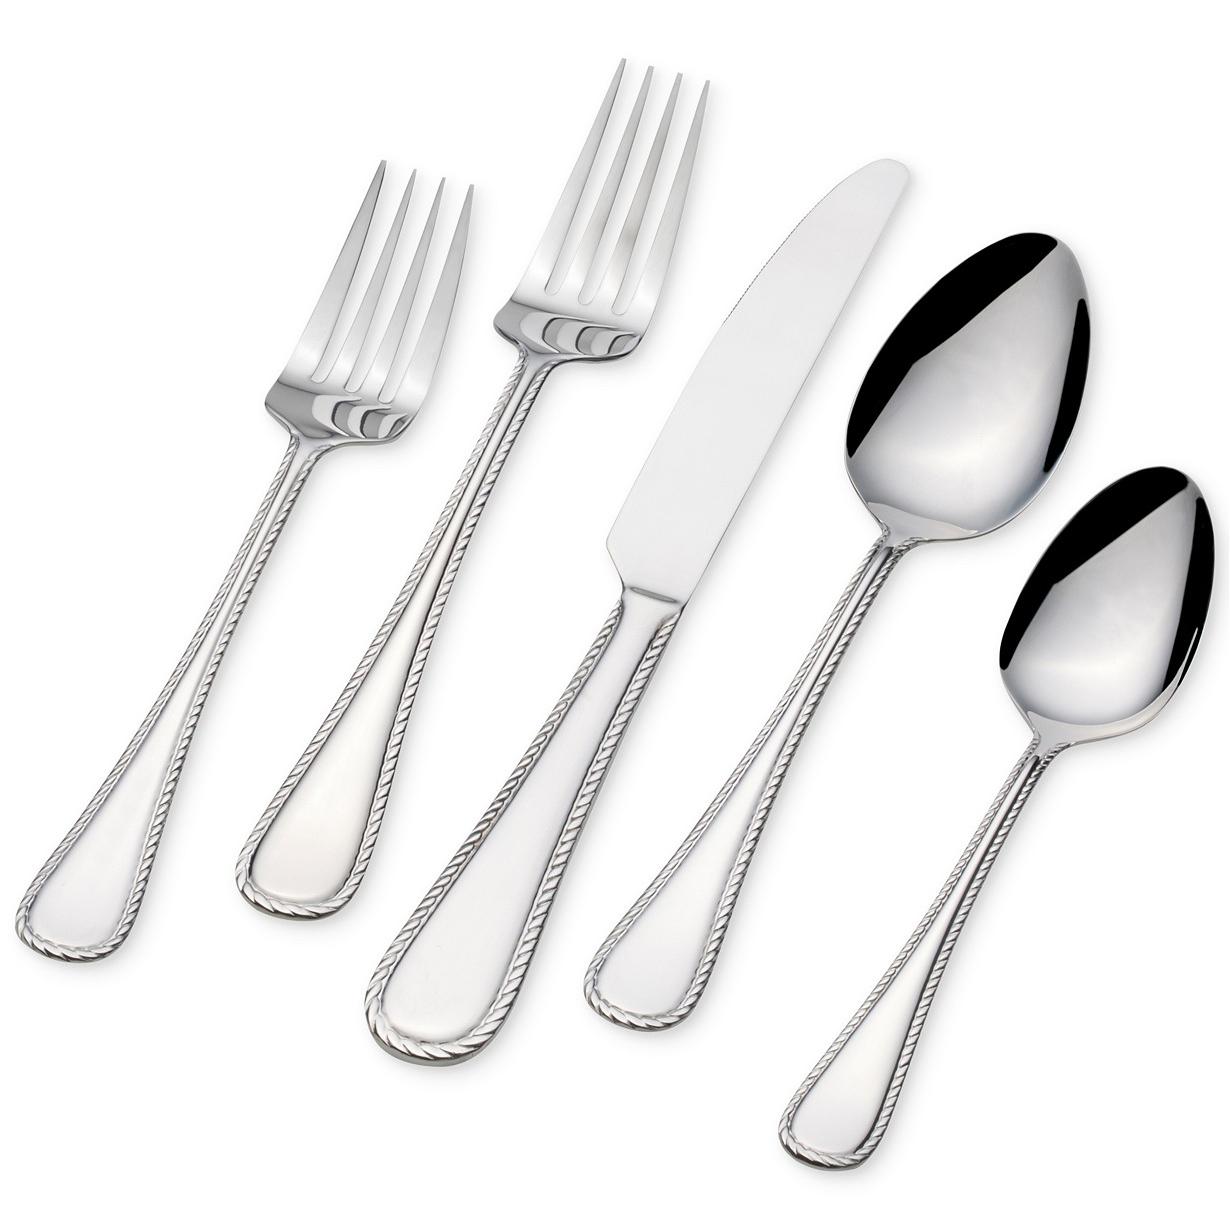 International Silver 51-Piece Stainless Steel Set for $29.99 Shipped